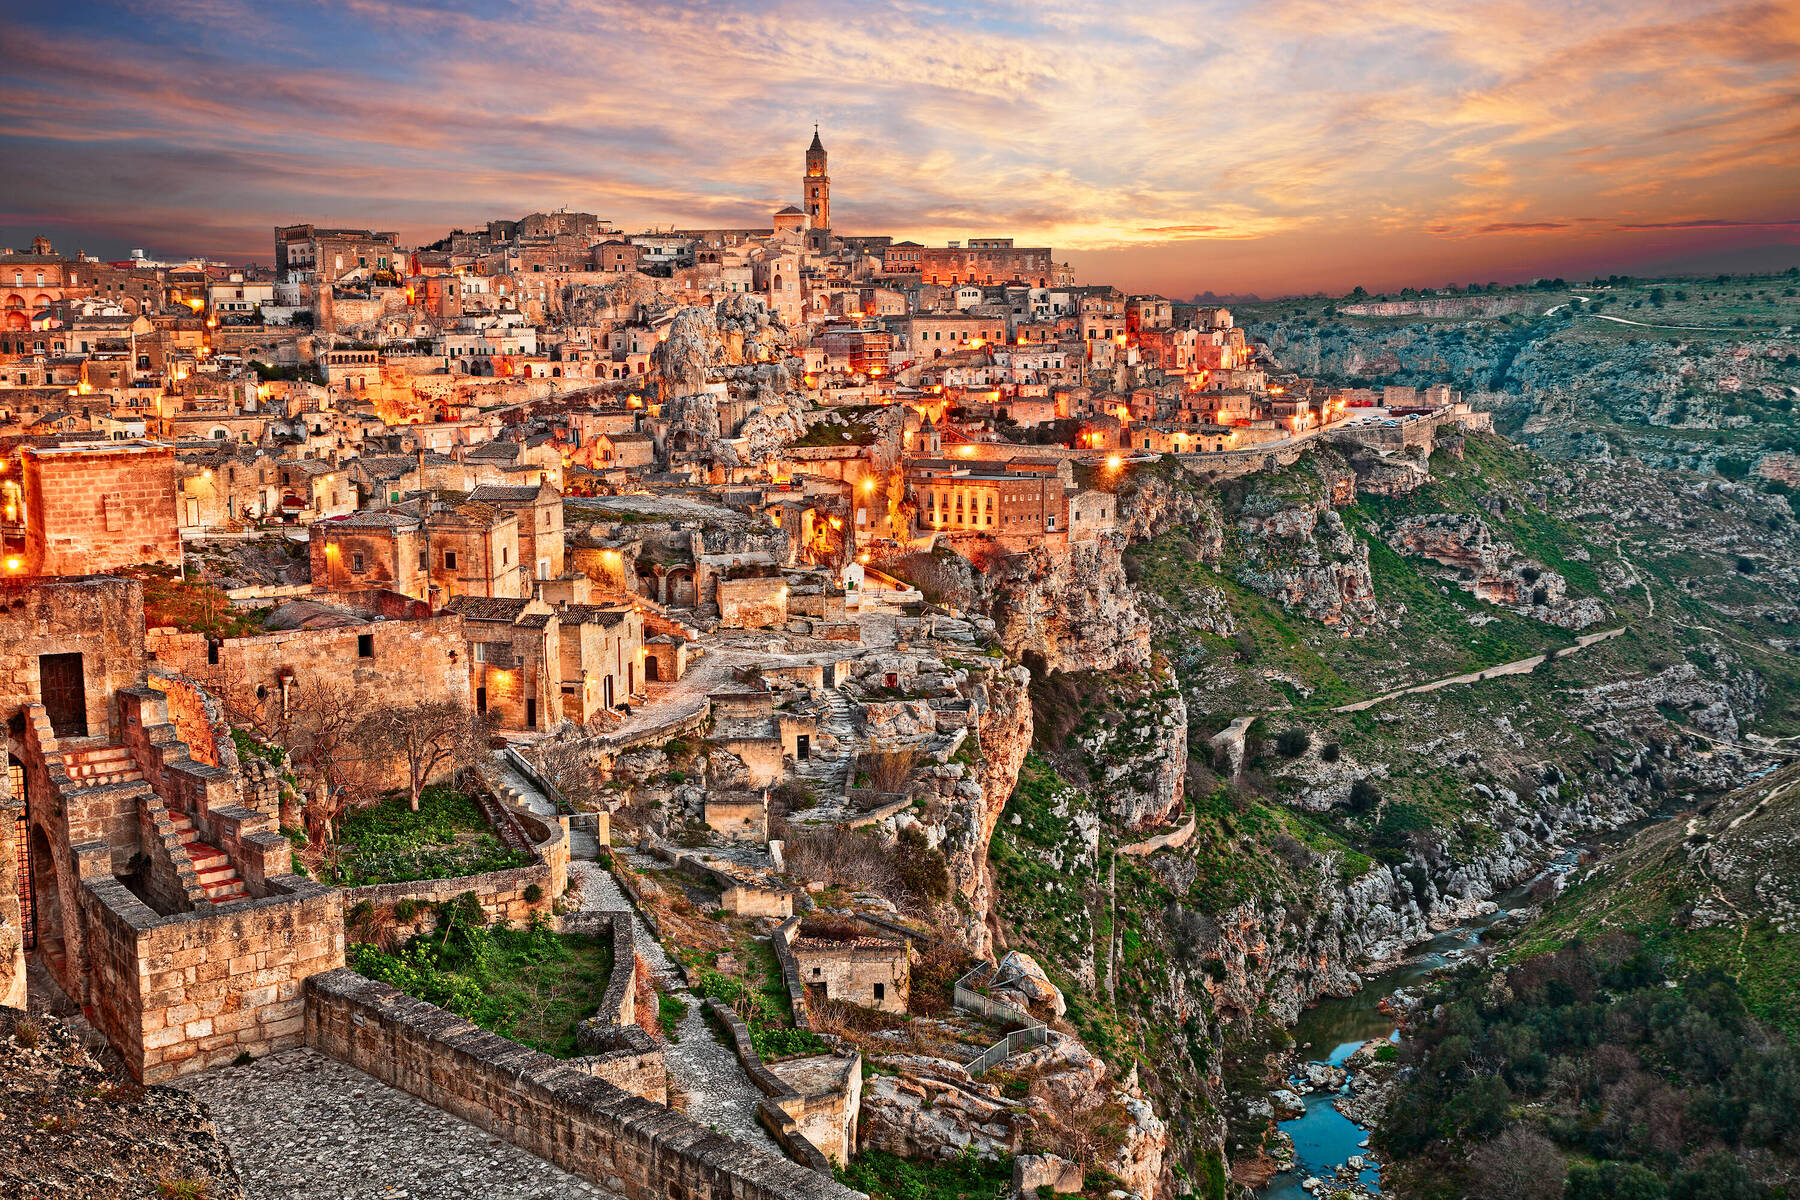 Matera - The extraordinary cave town in Italy